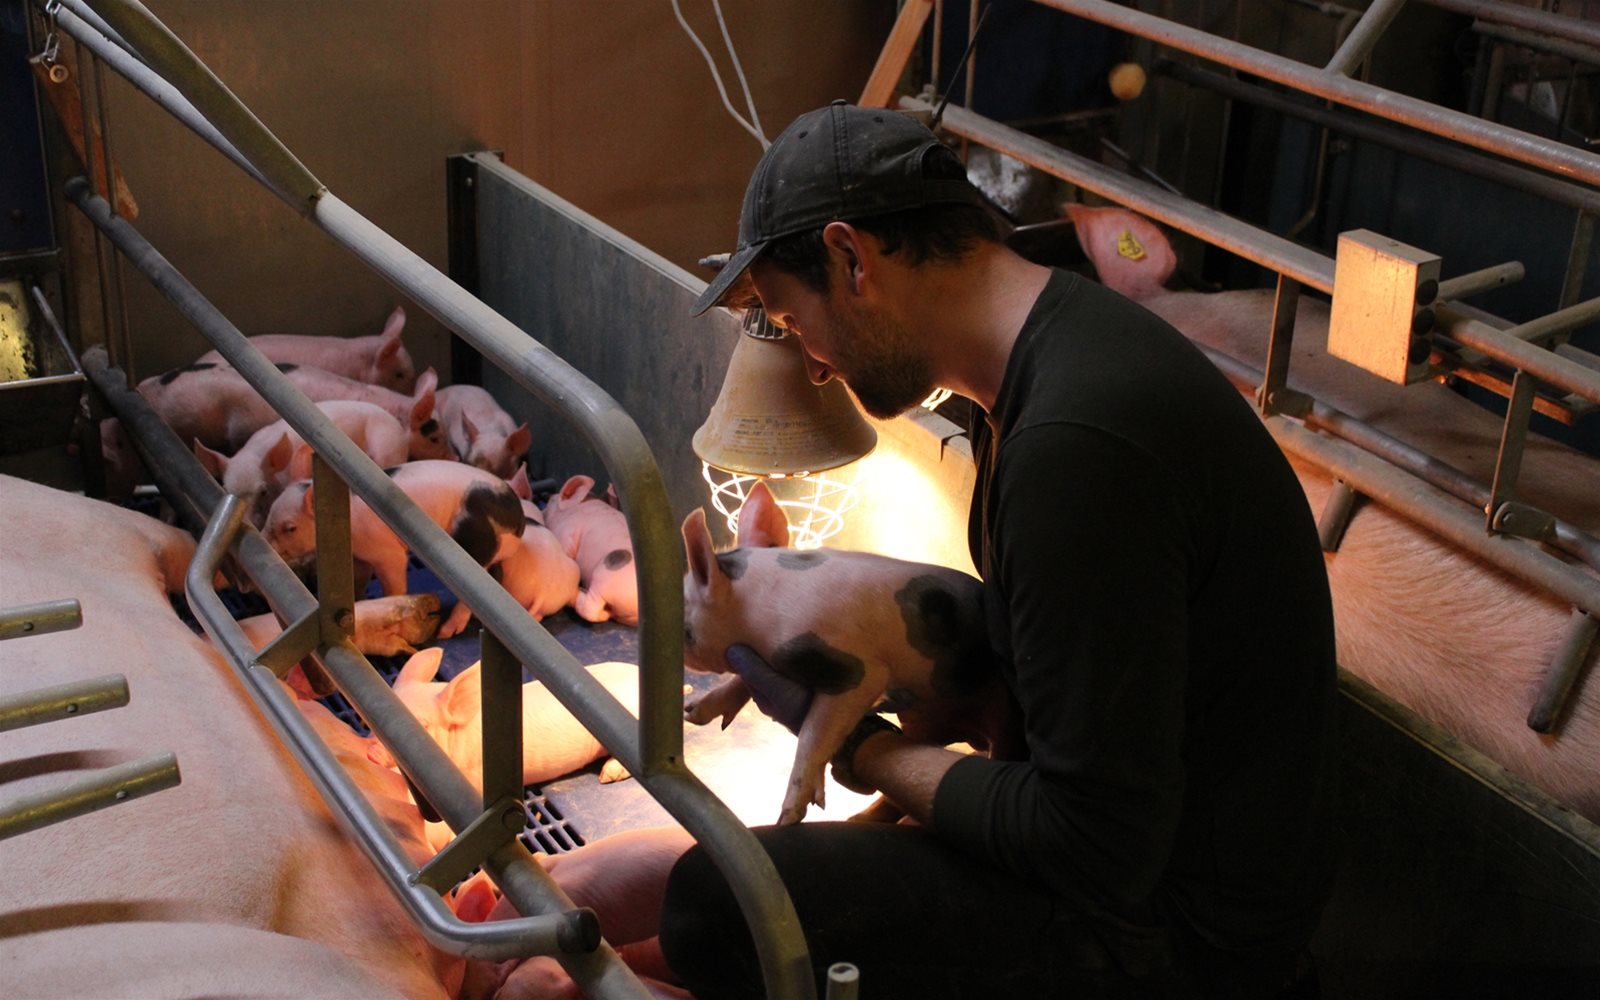 Darren with young piglets